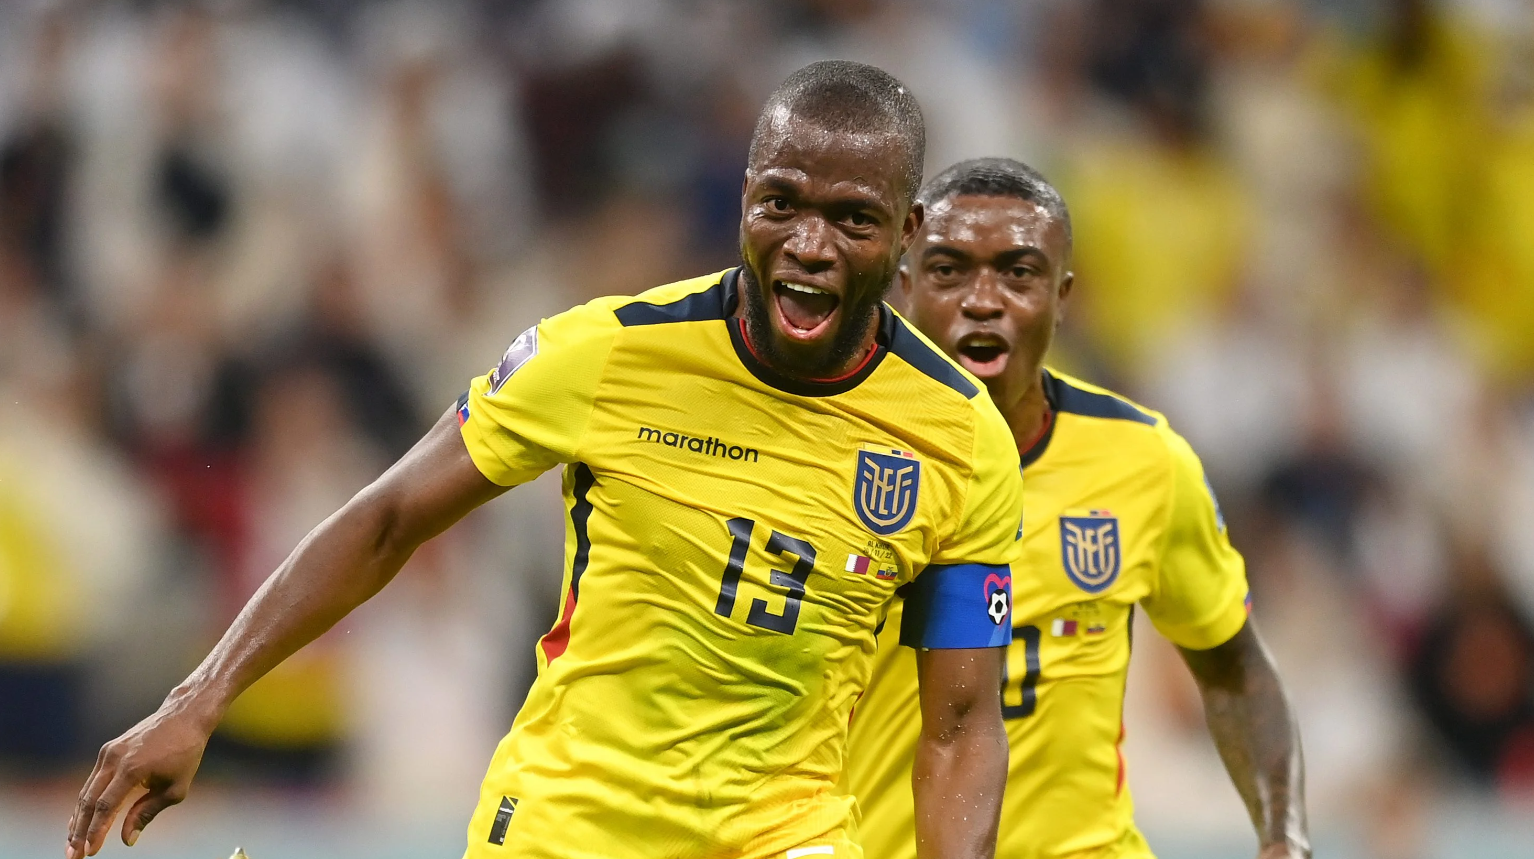 Enner Valencia run riot at the Al Bayt Stadium in Al Khor as he helped Ecuador dispose of Qatar in the World Cup 2022 tournament opener